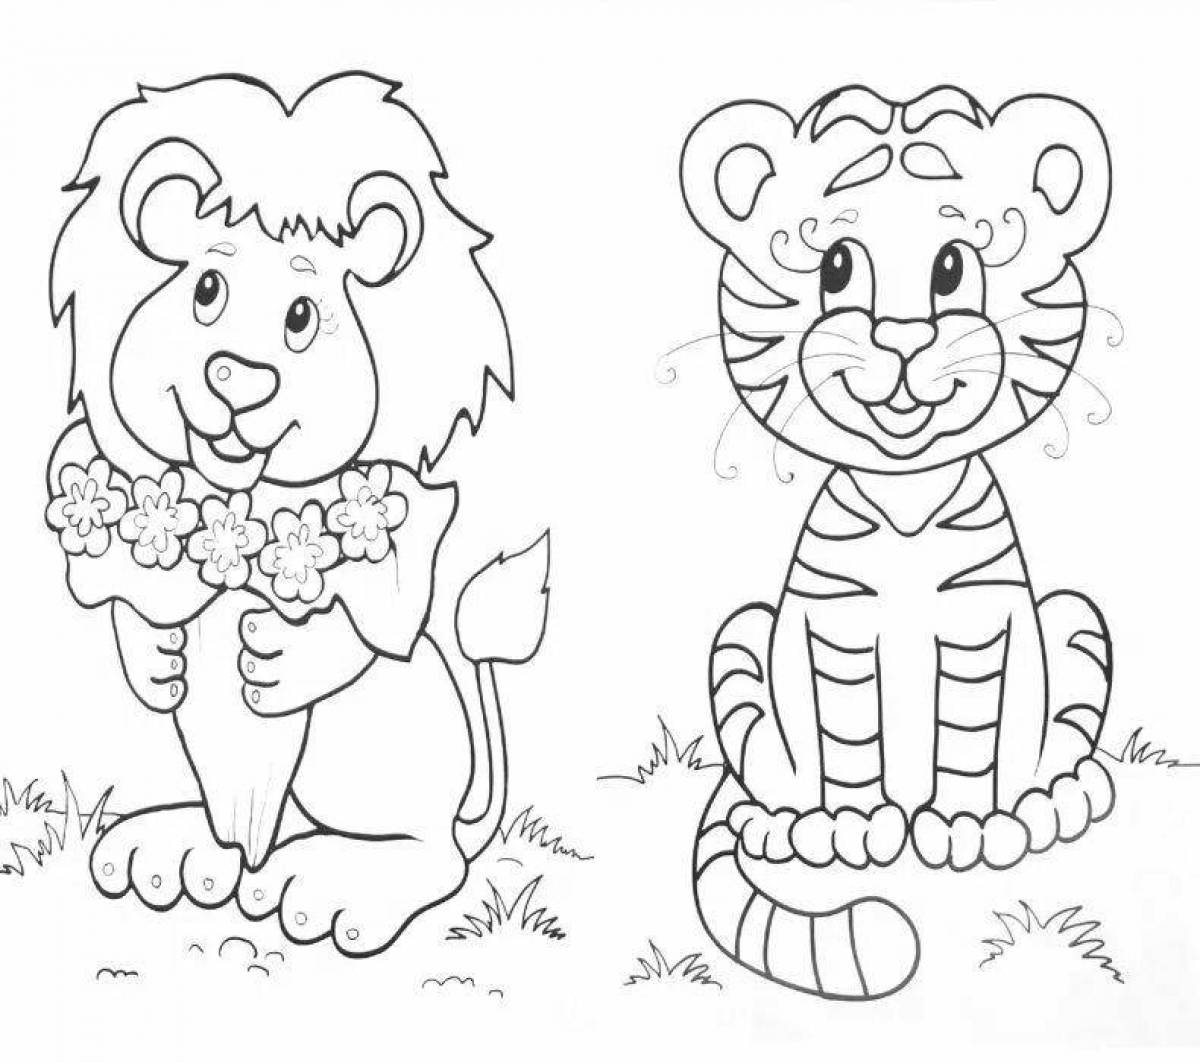 Explosion coloring book for 3-4 year olds